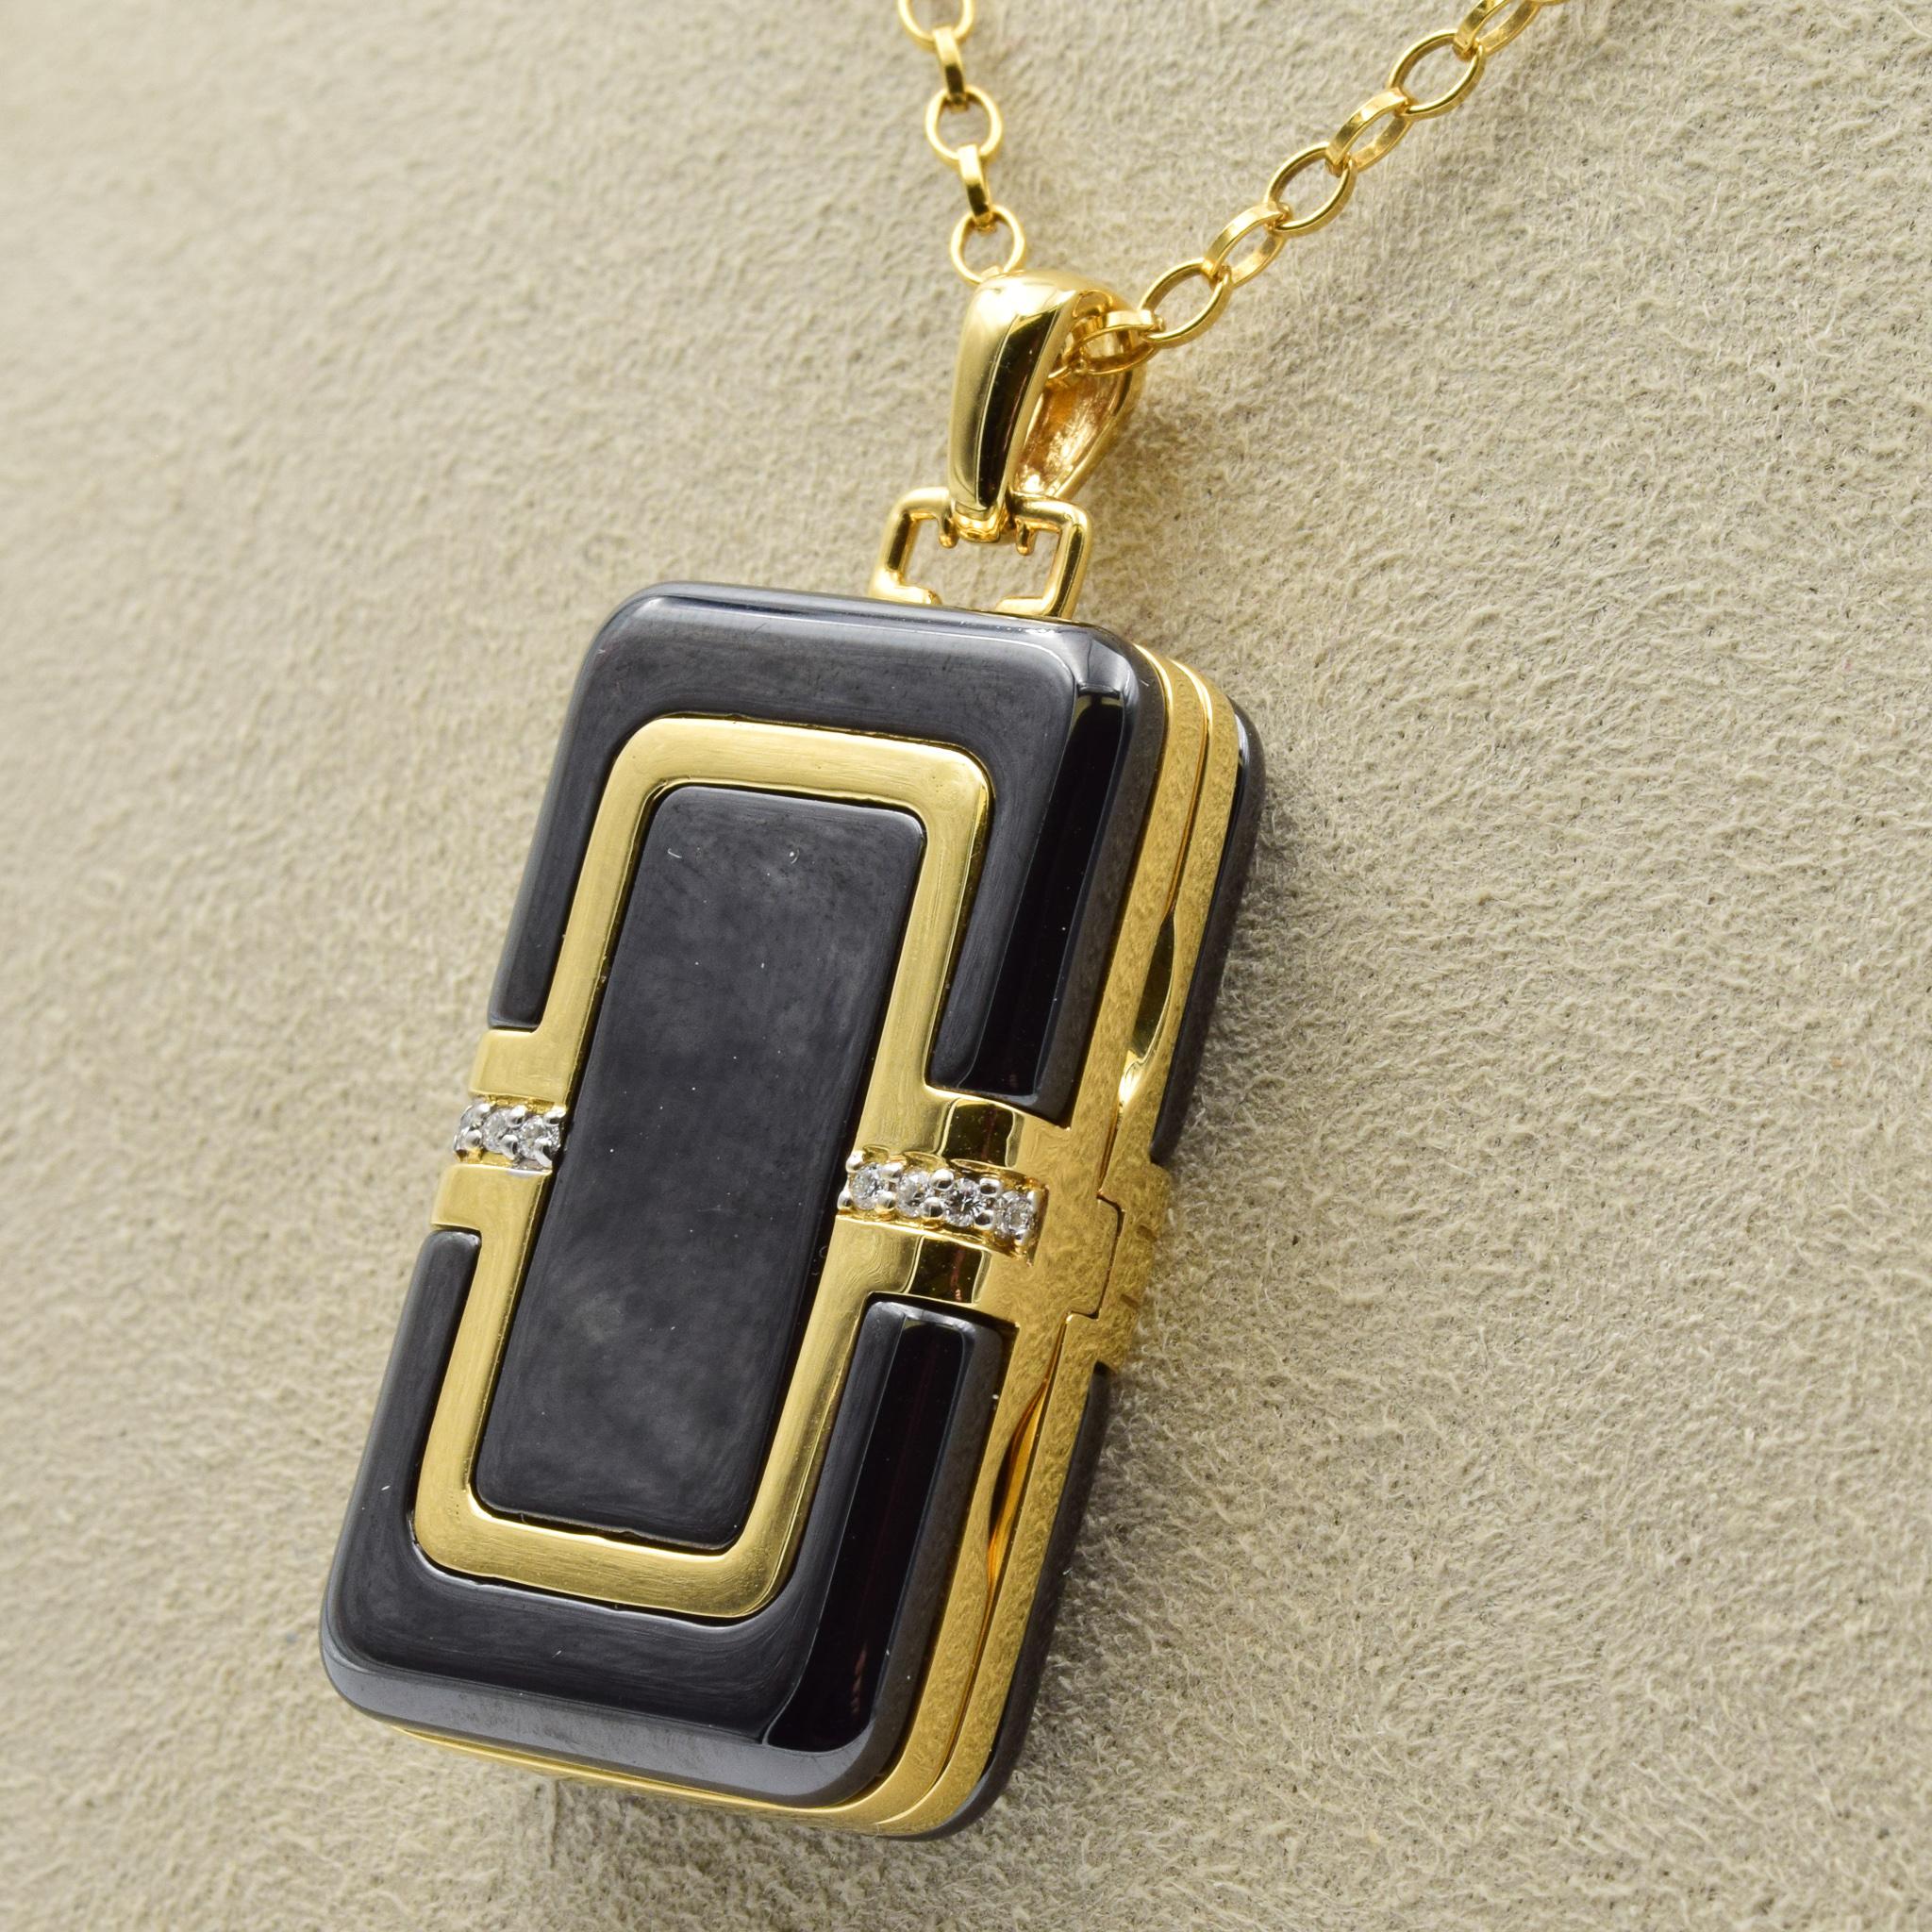 This is a brand new Monica Rich Kosann Necklace and we are an authorized dealer.  Please let us know if you have any further questions regarding this piece.  

18K Yellow Gold and Ceramic
32” Yellow Gold Chain
Set with Diamonds
Locket Measures